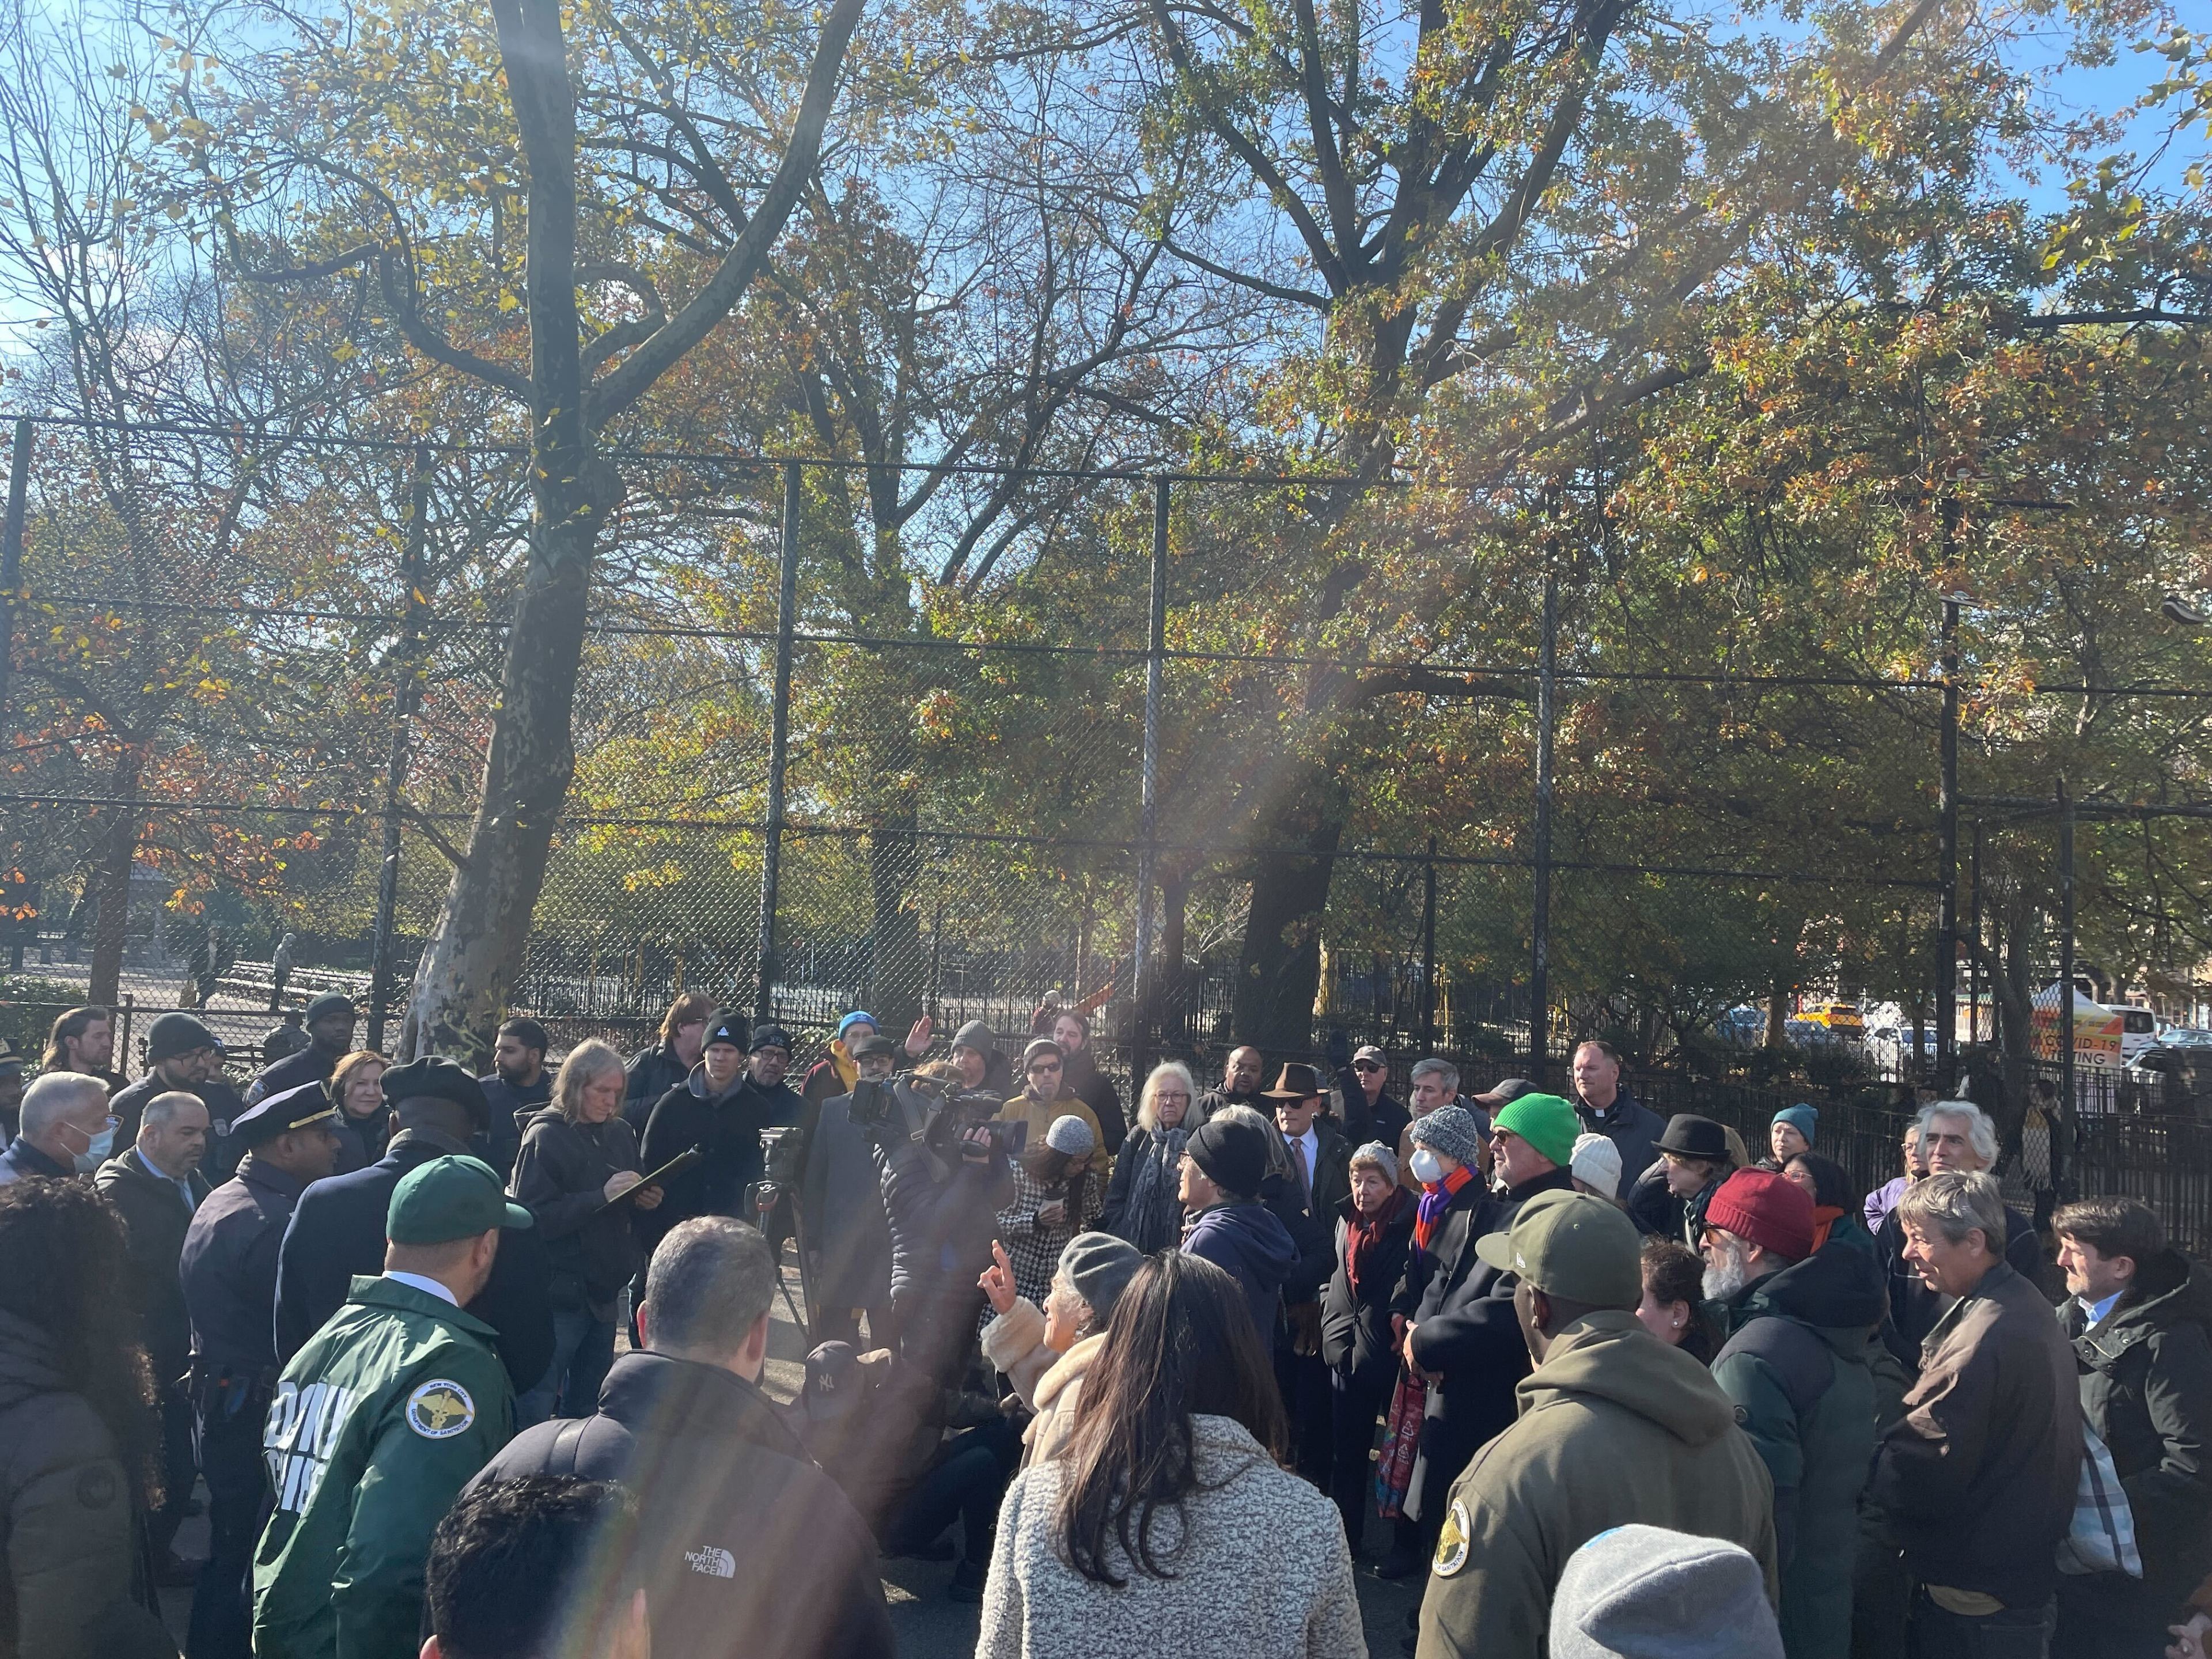 A crowd of around three dozen people gather on a cold sunny morning in Tompkins square park to discuss public safety.